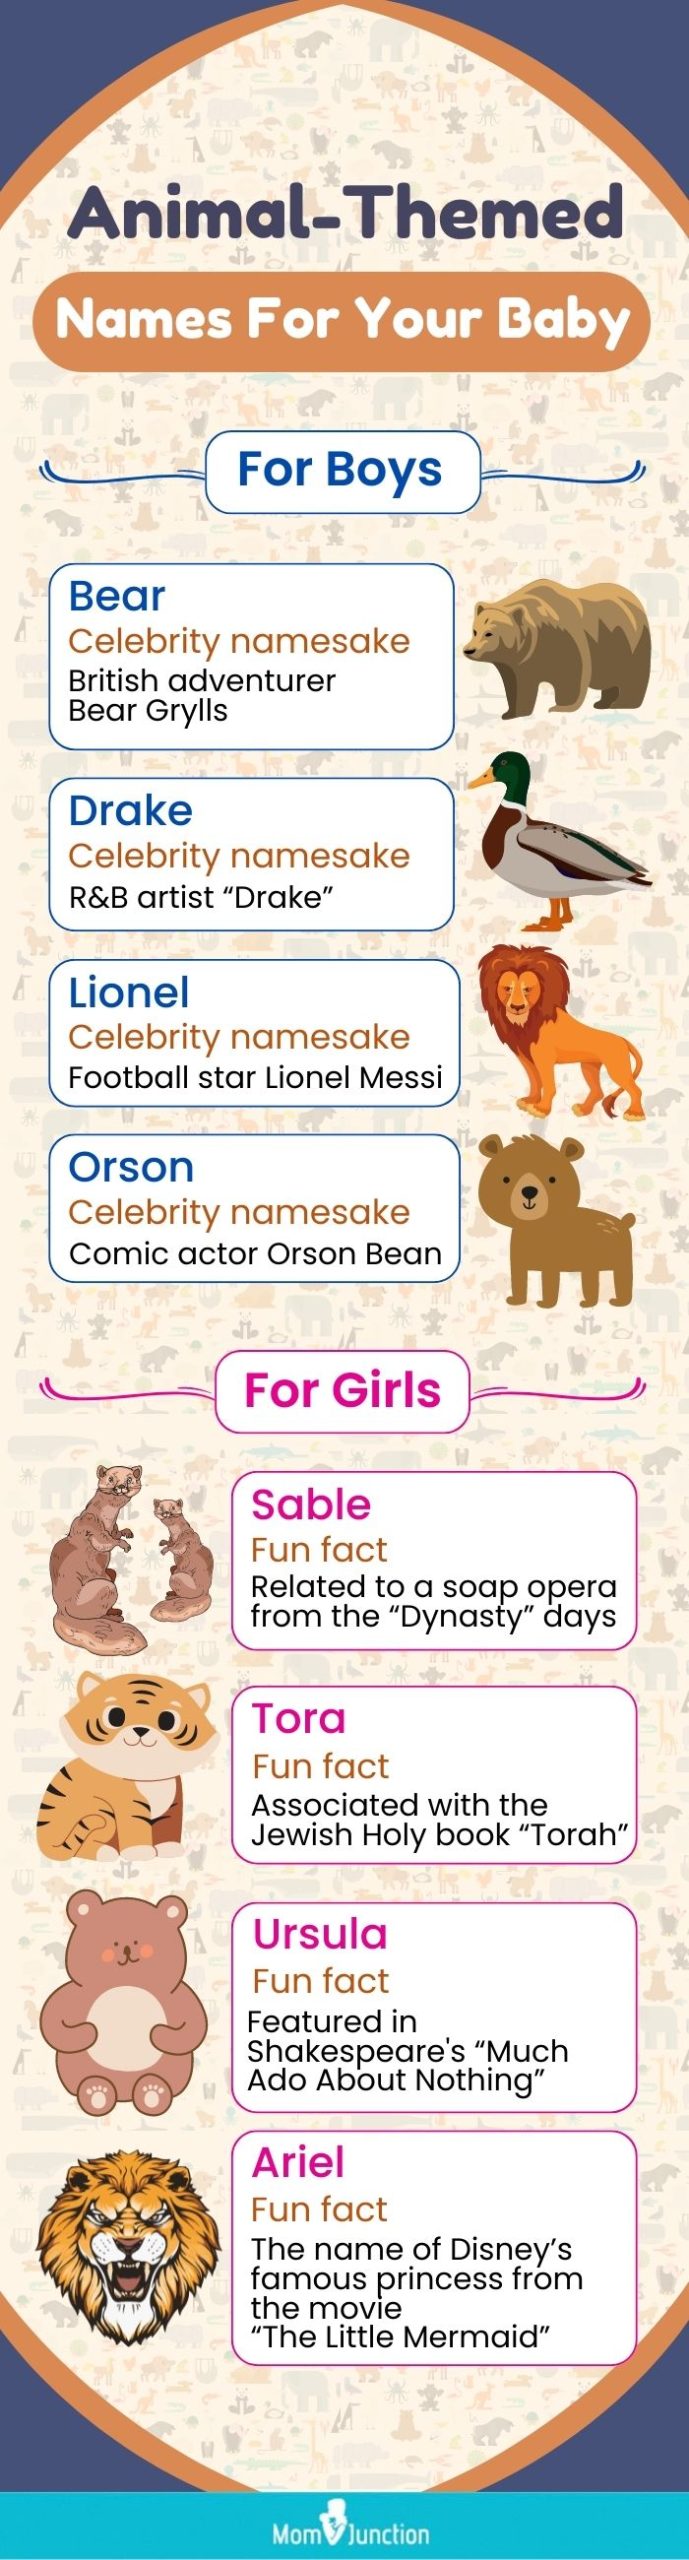 animal themed names for your baby (infographic)